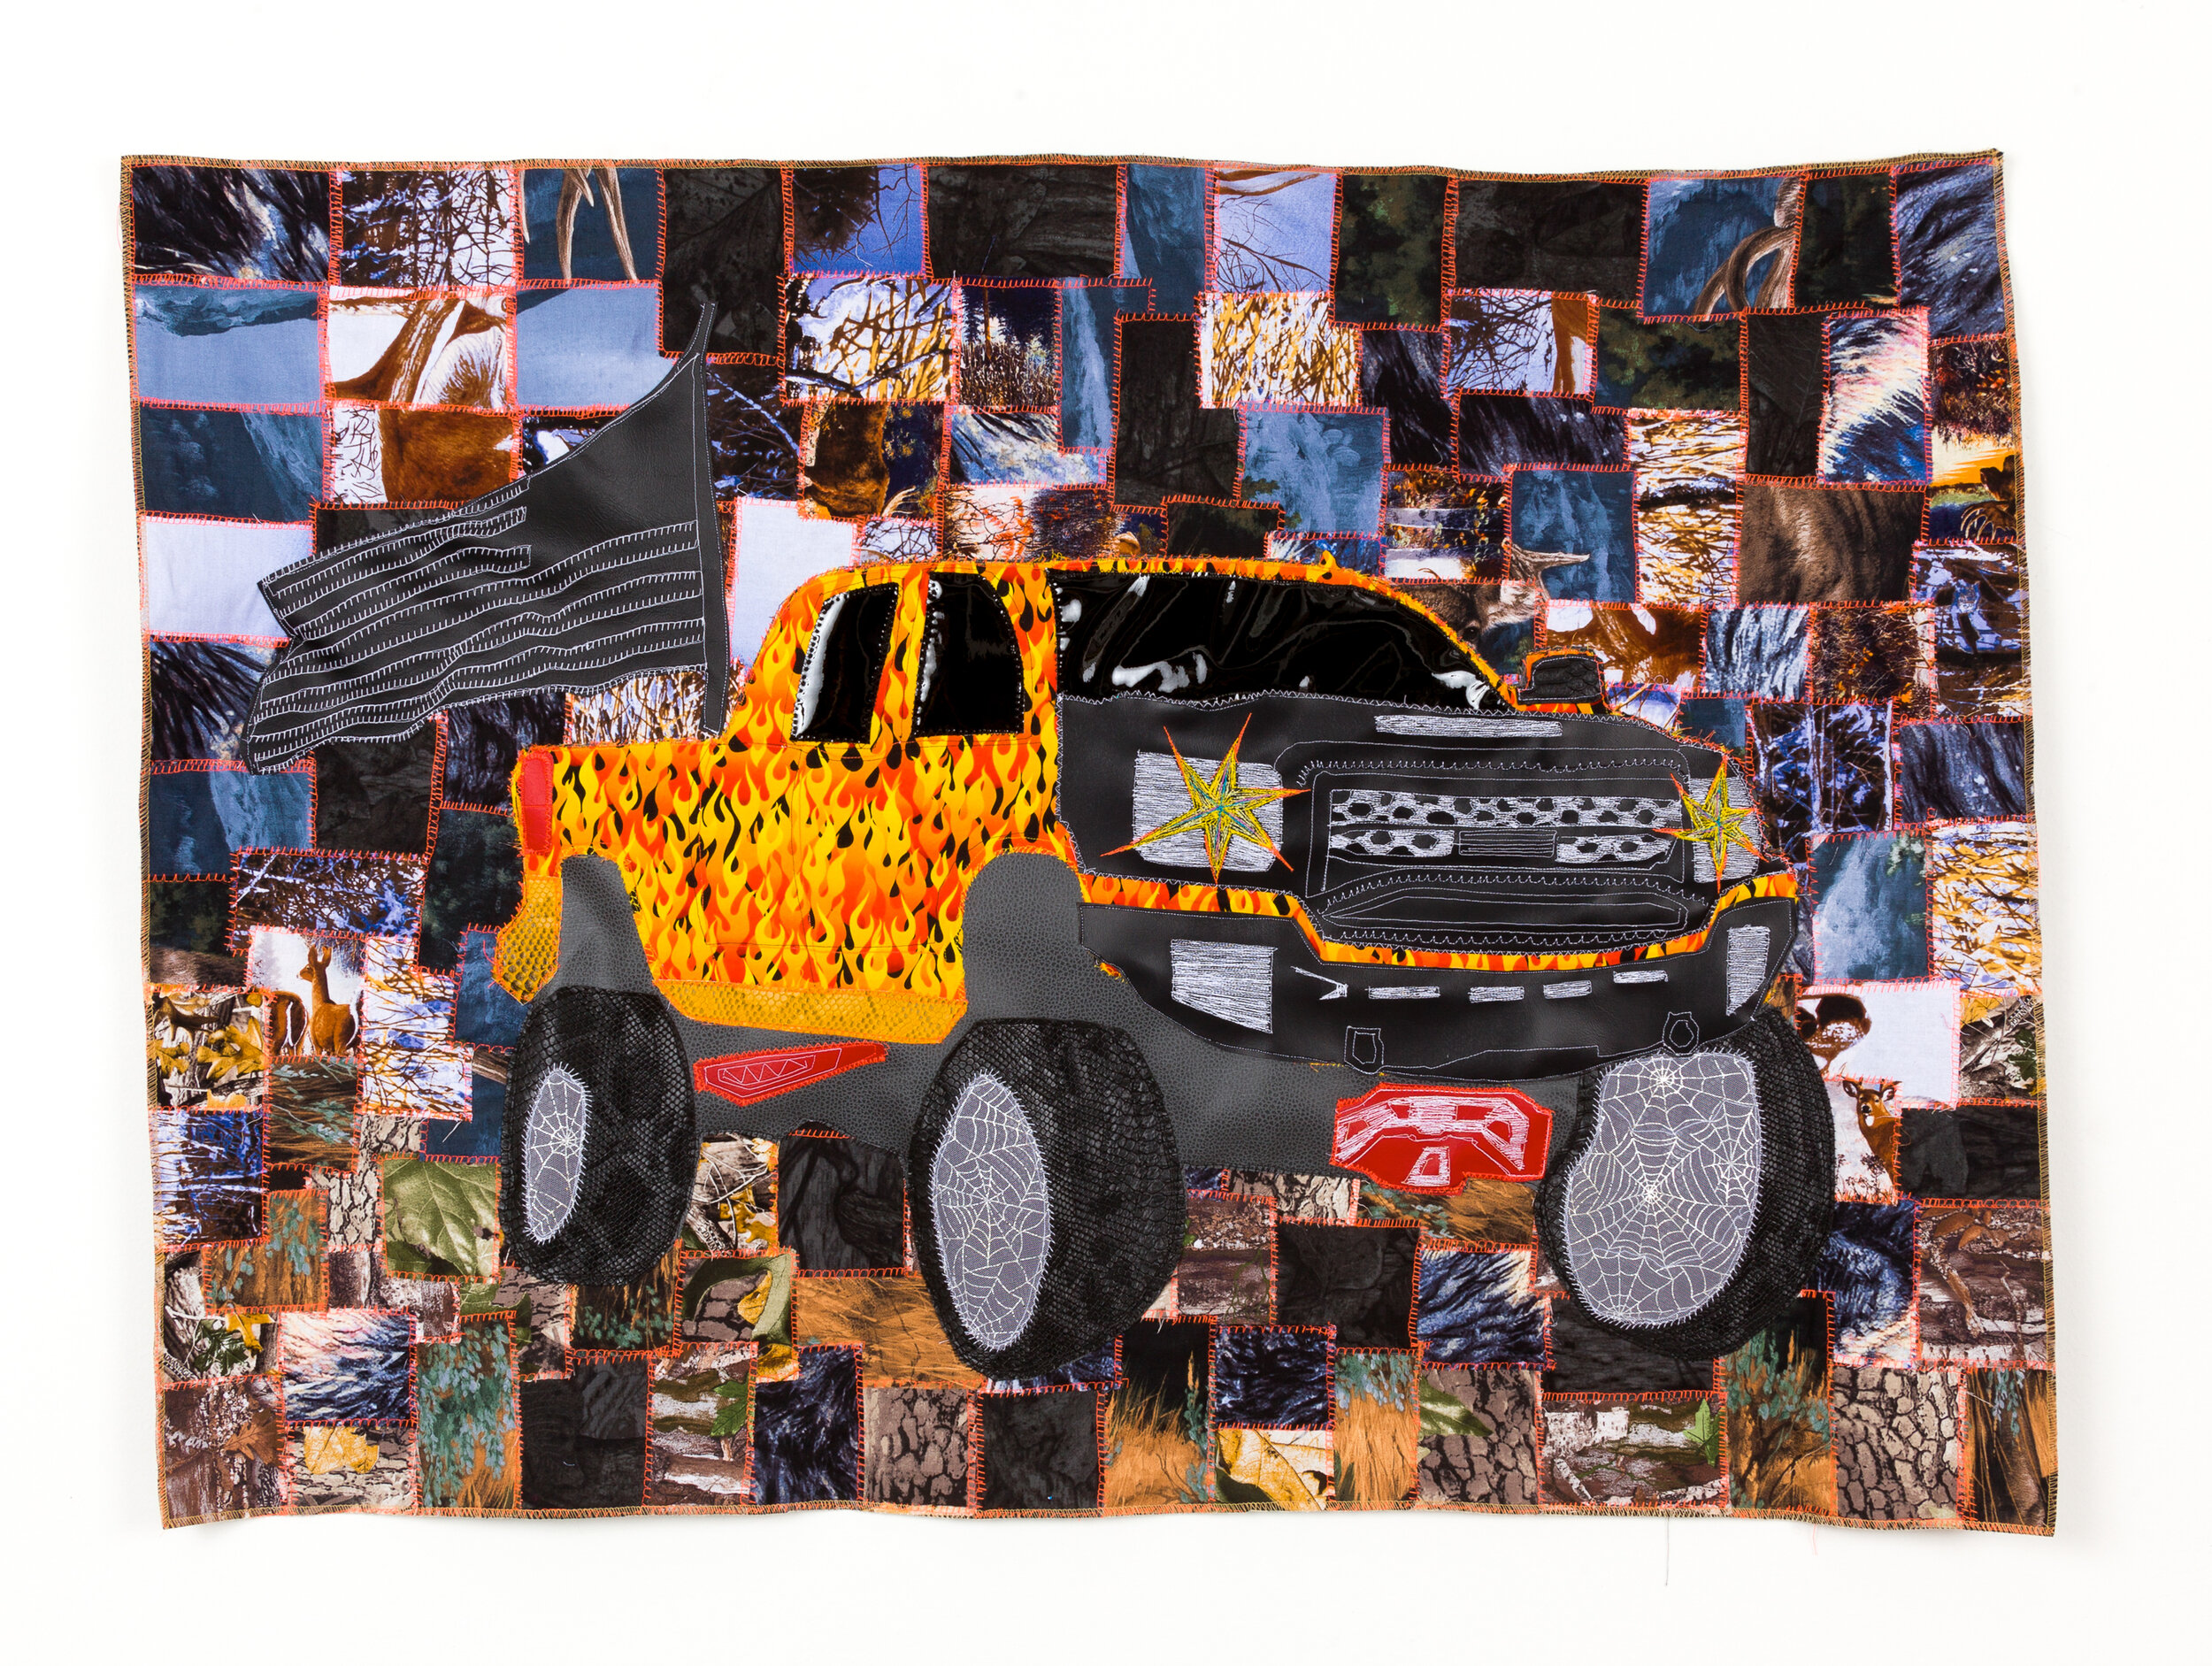  Burning Pride, 2020  assorted hunting camp fabric, cotton fabric, faux leather, thread, hardware  34x46 inches 